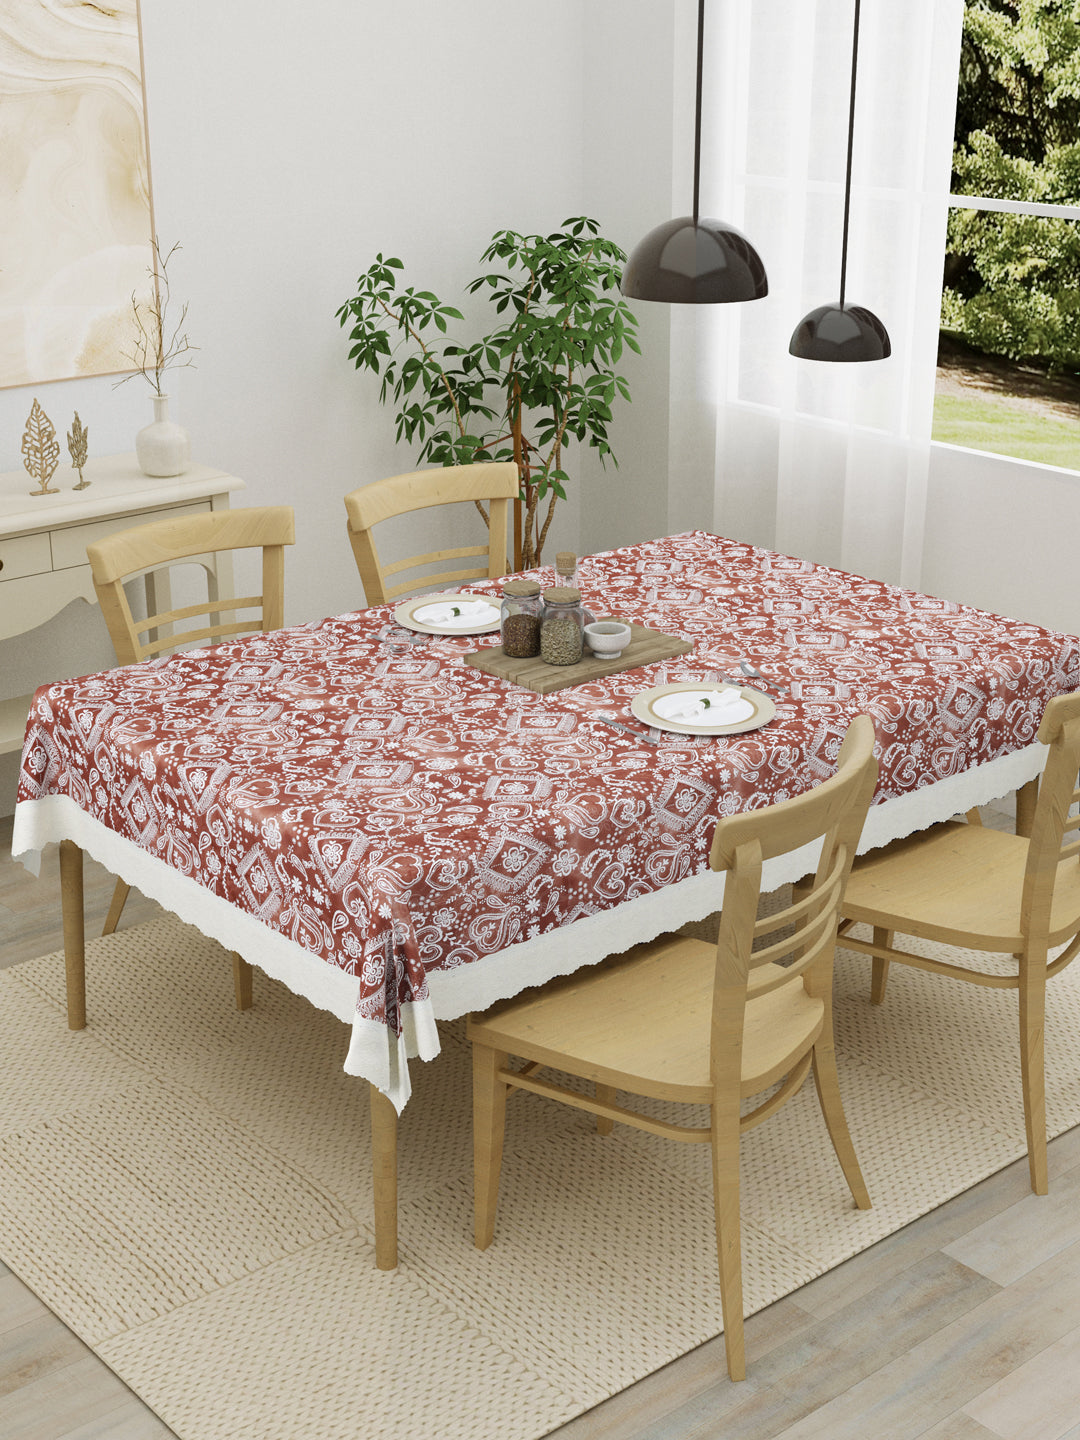 4 Seater Dining Table Cover; Material - PVC; Anti Slip; White Print On Brown